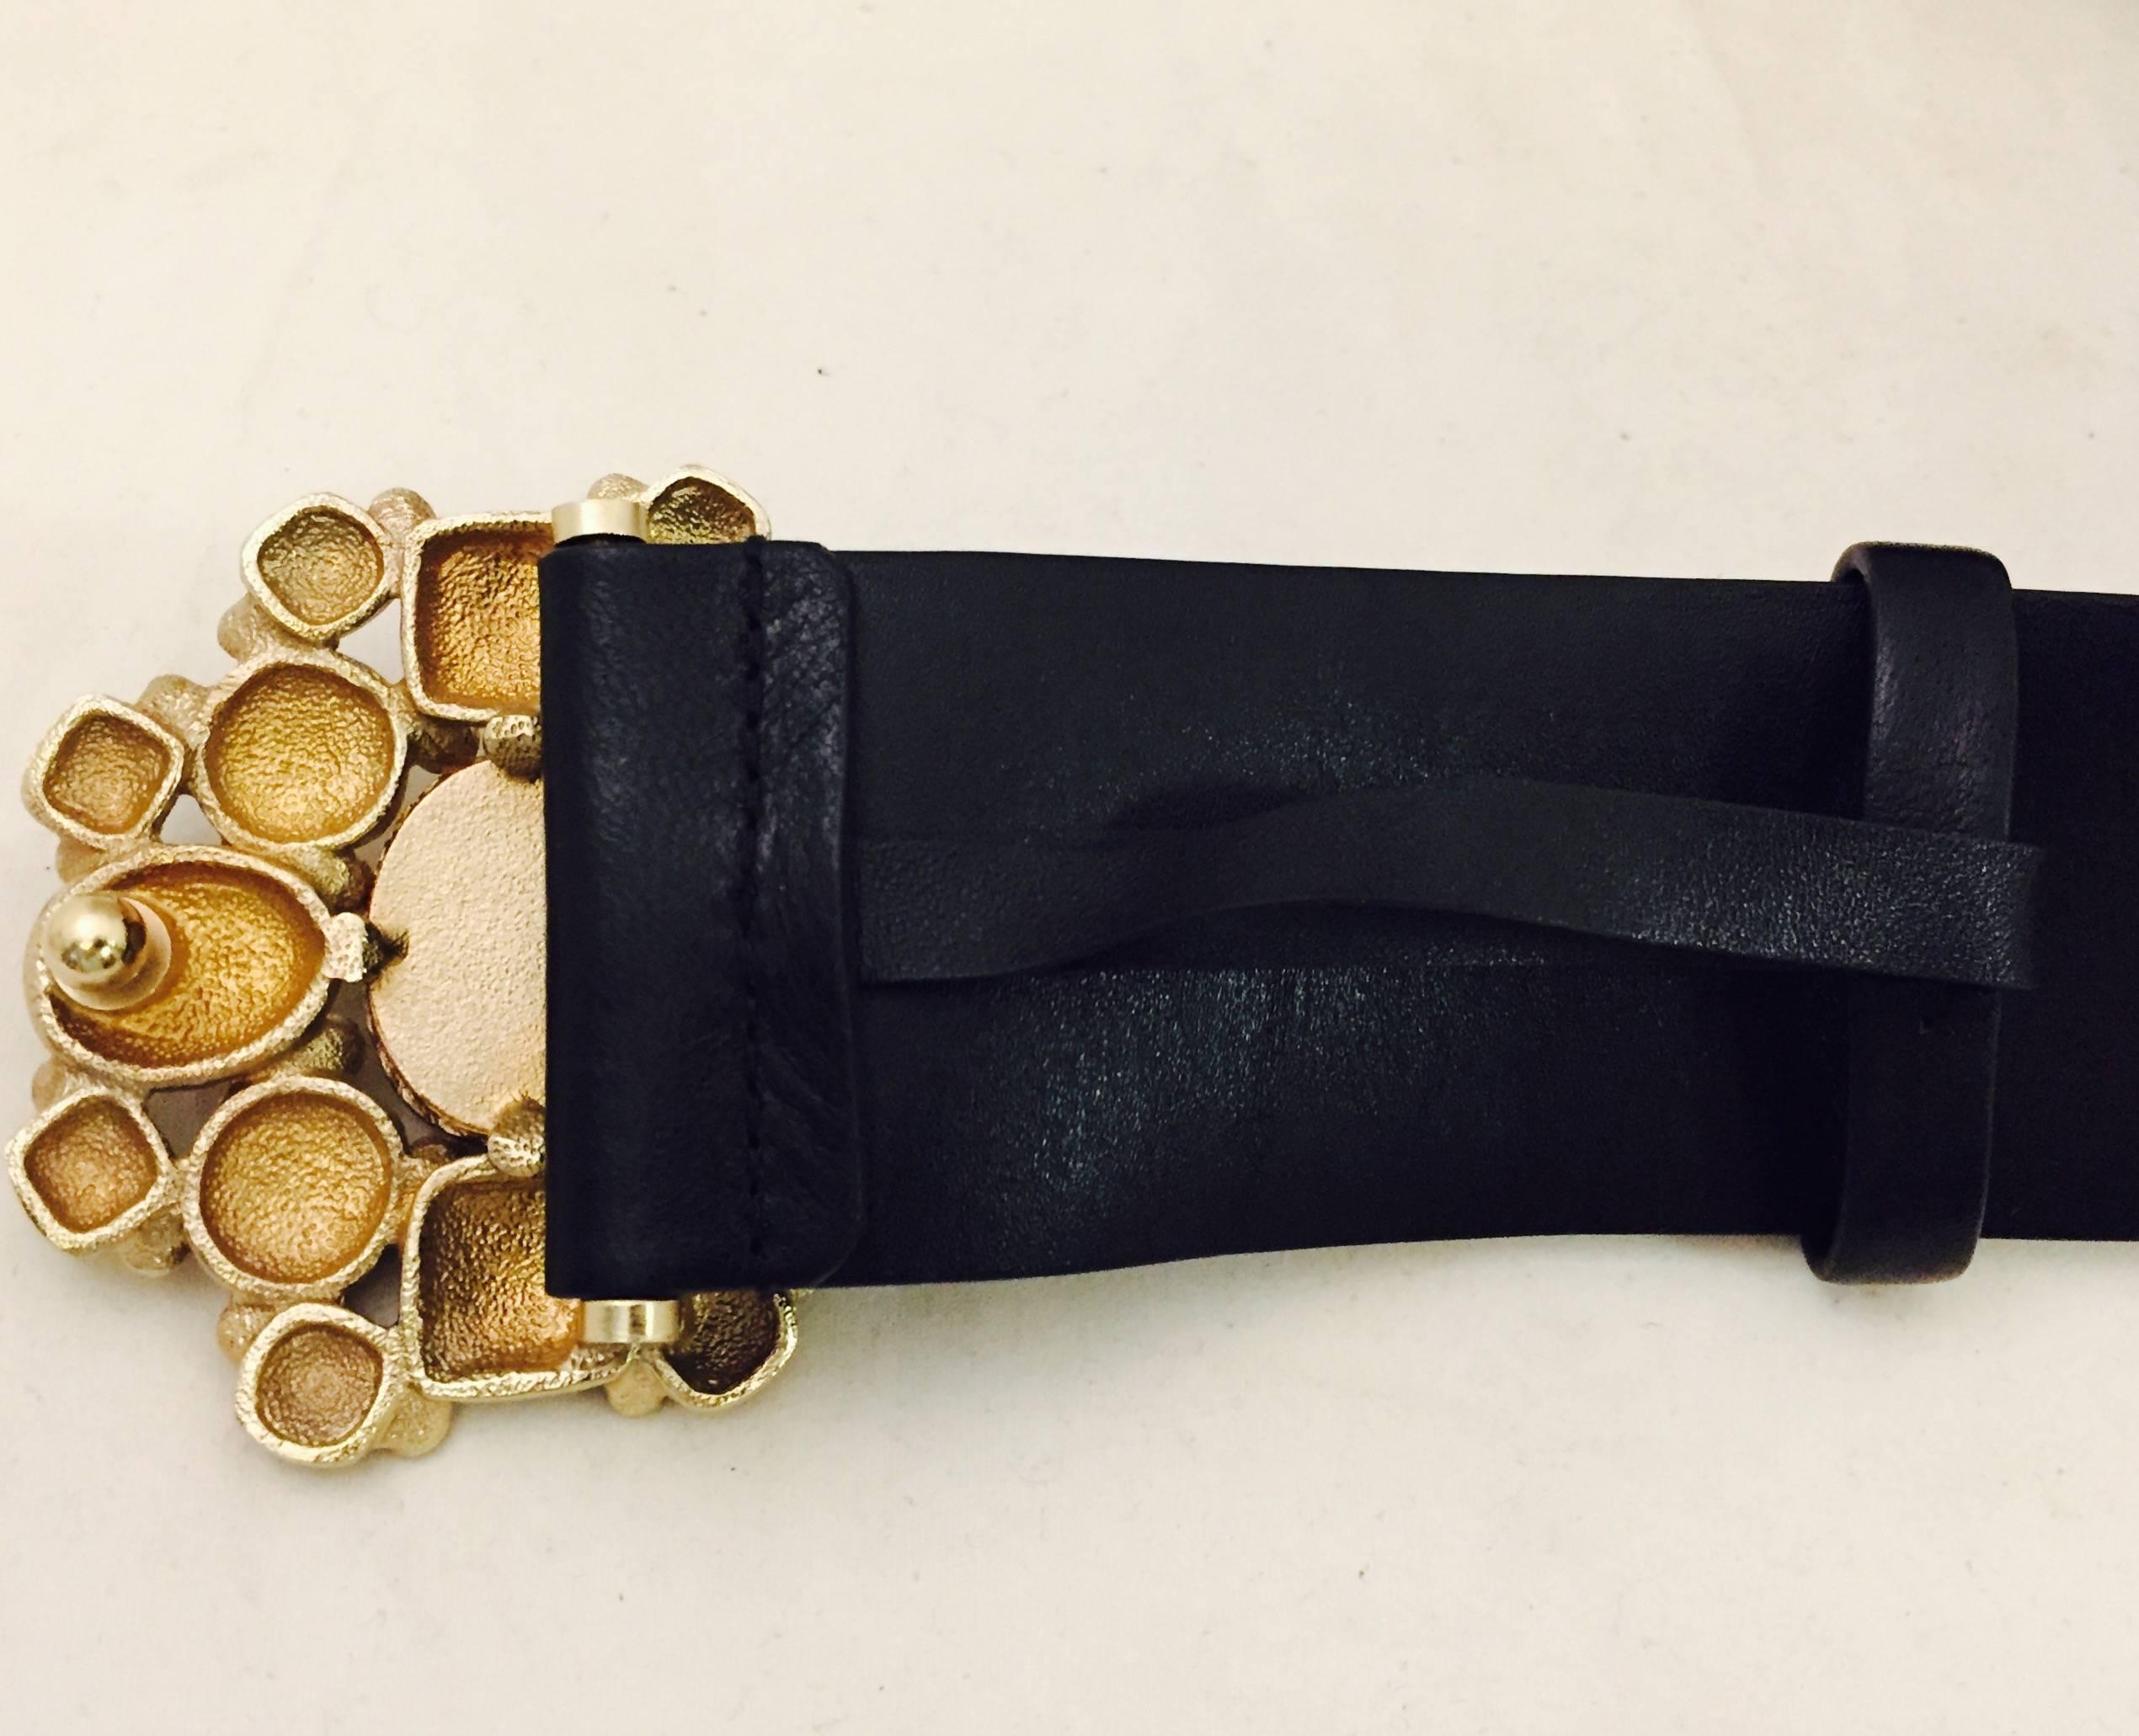 Chanel black leather belt with its eminent belt buckle medallion with Gripoix stones on antiqued gold tone flower design.  This stunner is a work of art that is wearable and unique.  The Gripoix stones are Red, Black and Blue with the CC logo on the